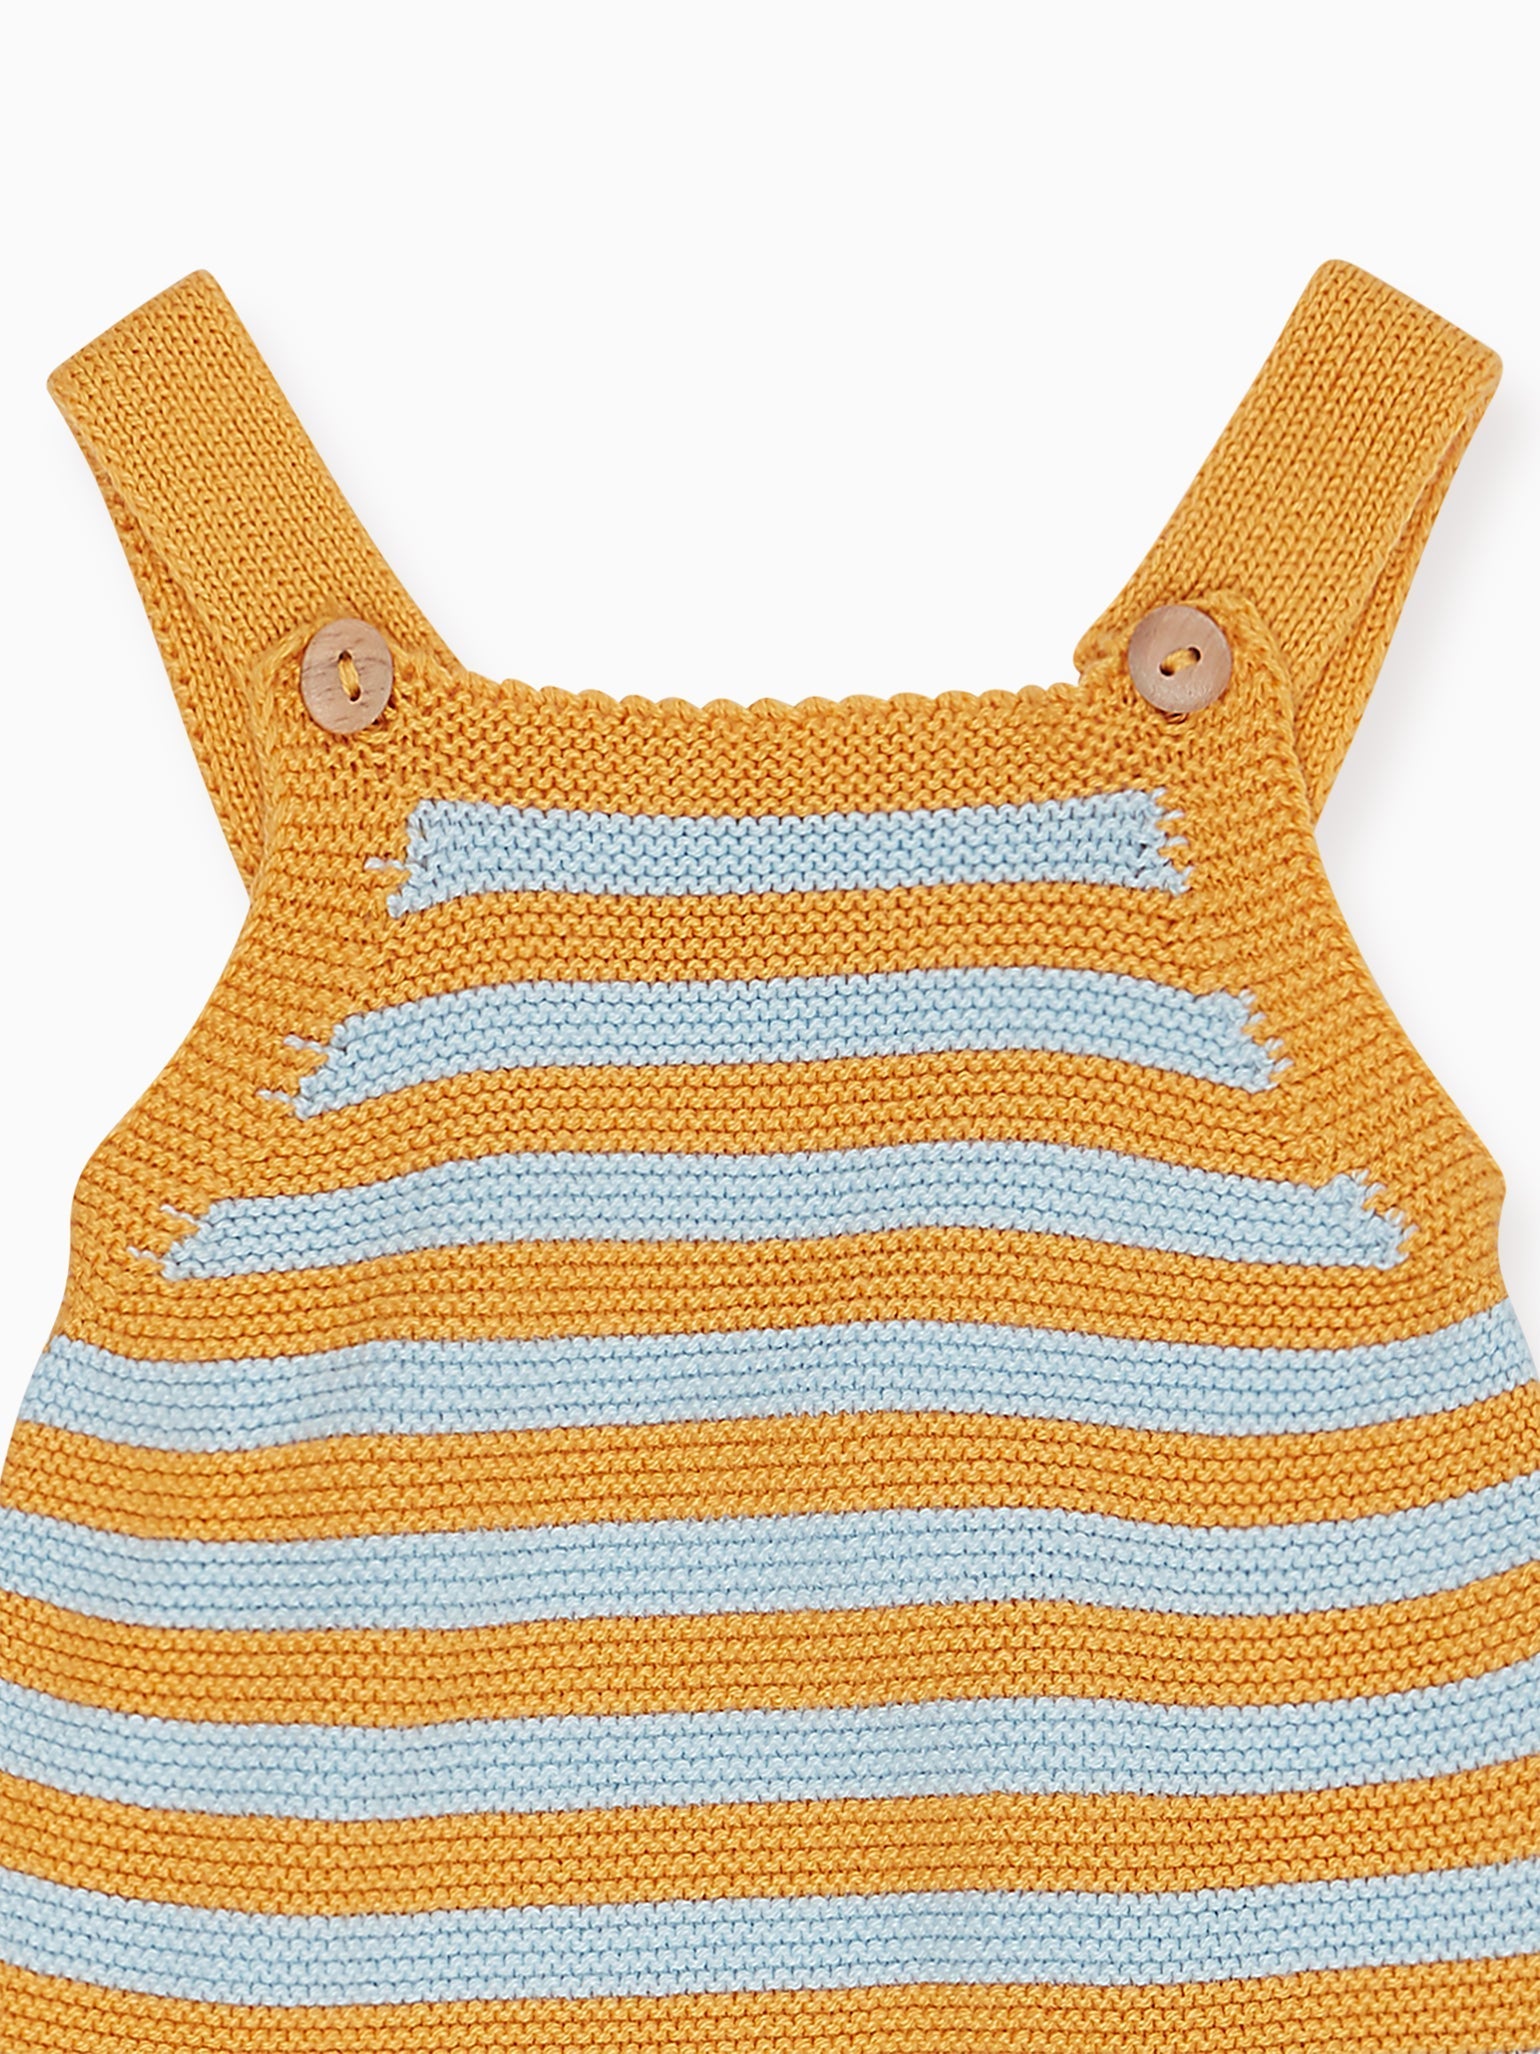 Honey Stripe Ninette Cotton Baby Knitted Dungarees